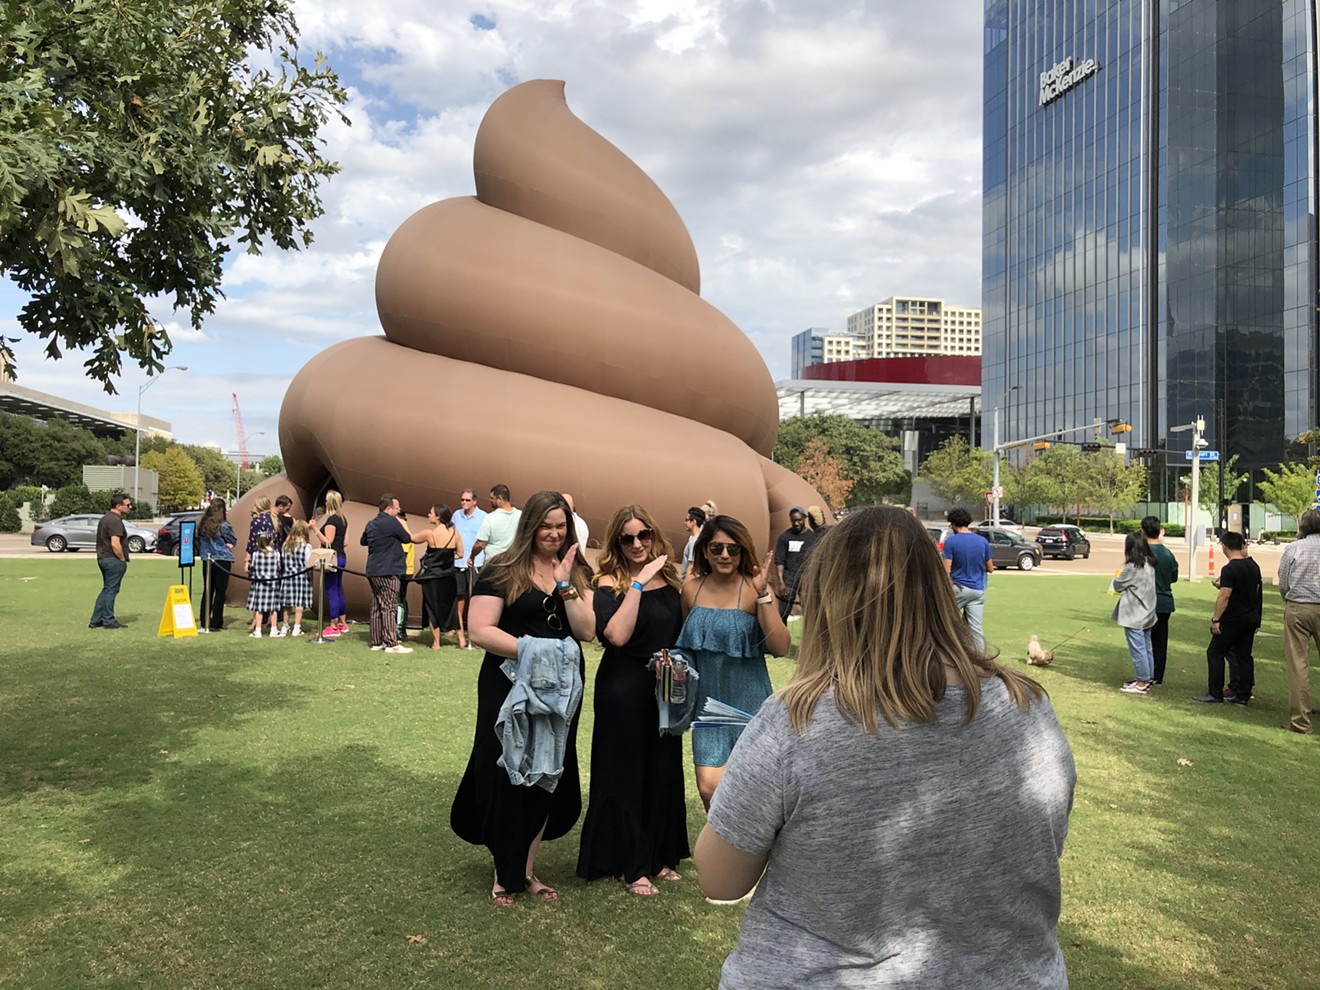 Kelly Gardner, Lisa Manz and Minal Patel pose for a photo in front of a giant, billowy turd that popped up on the northeastern part of Klyde Warren Park on Thursday.